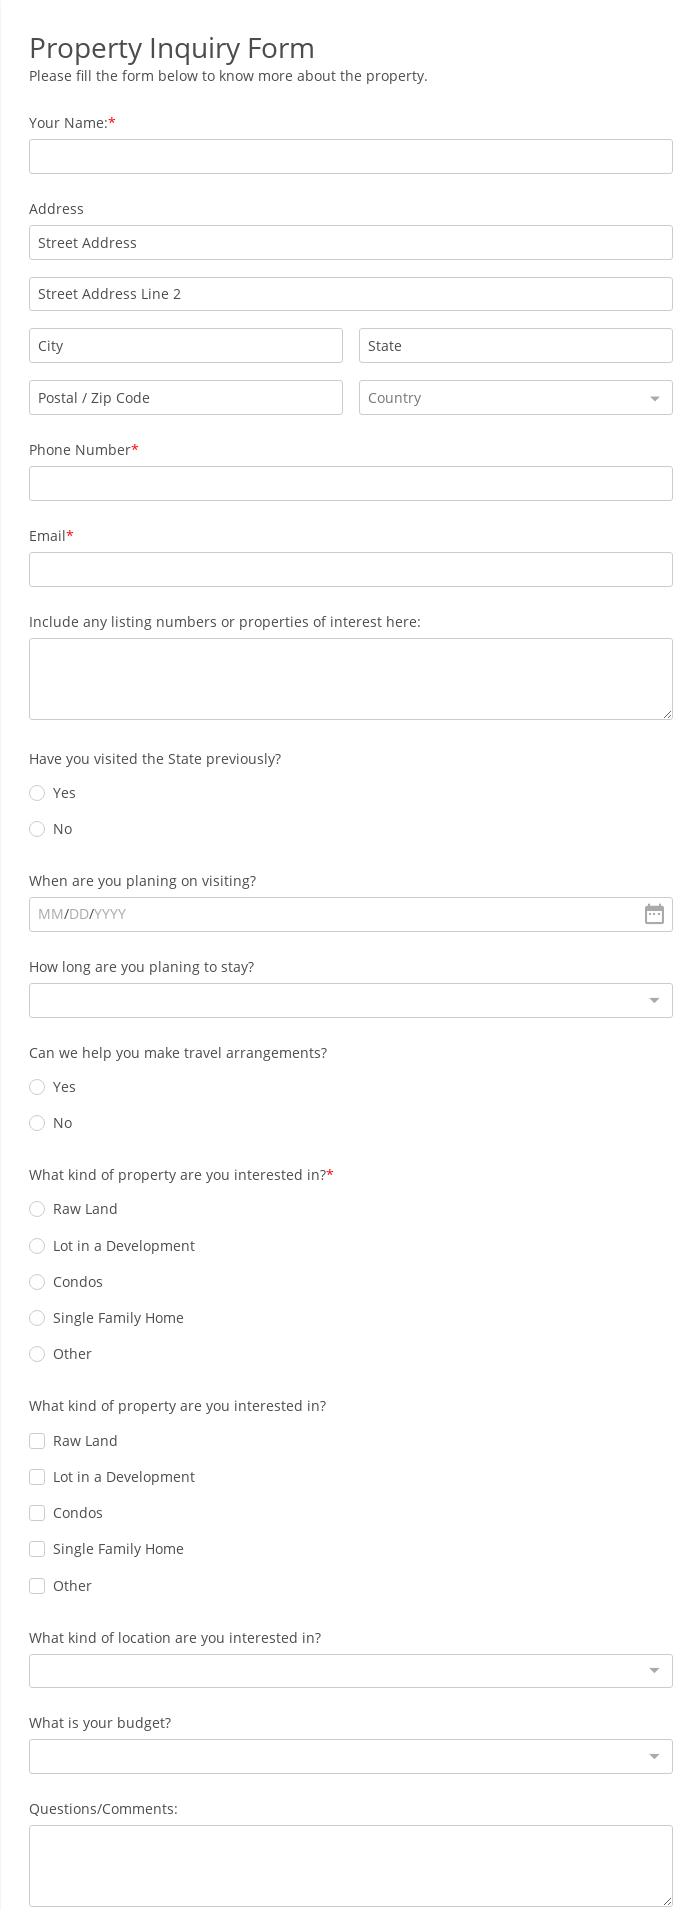 Property Inquiry Form